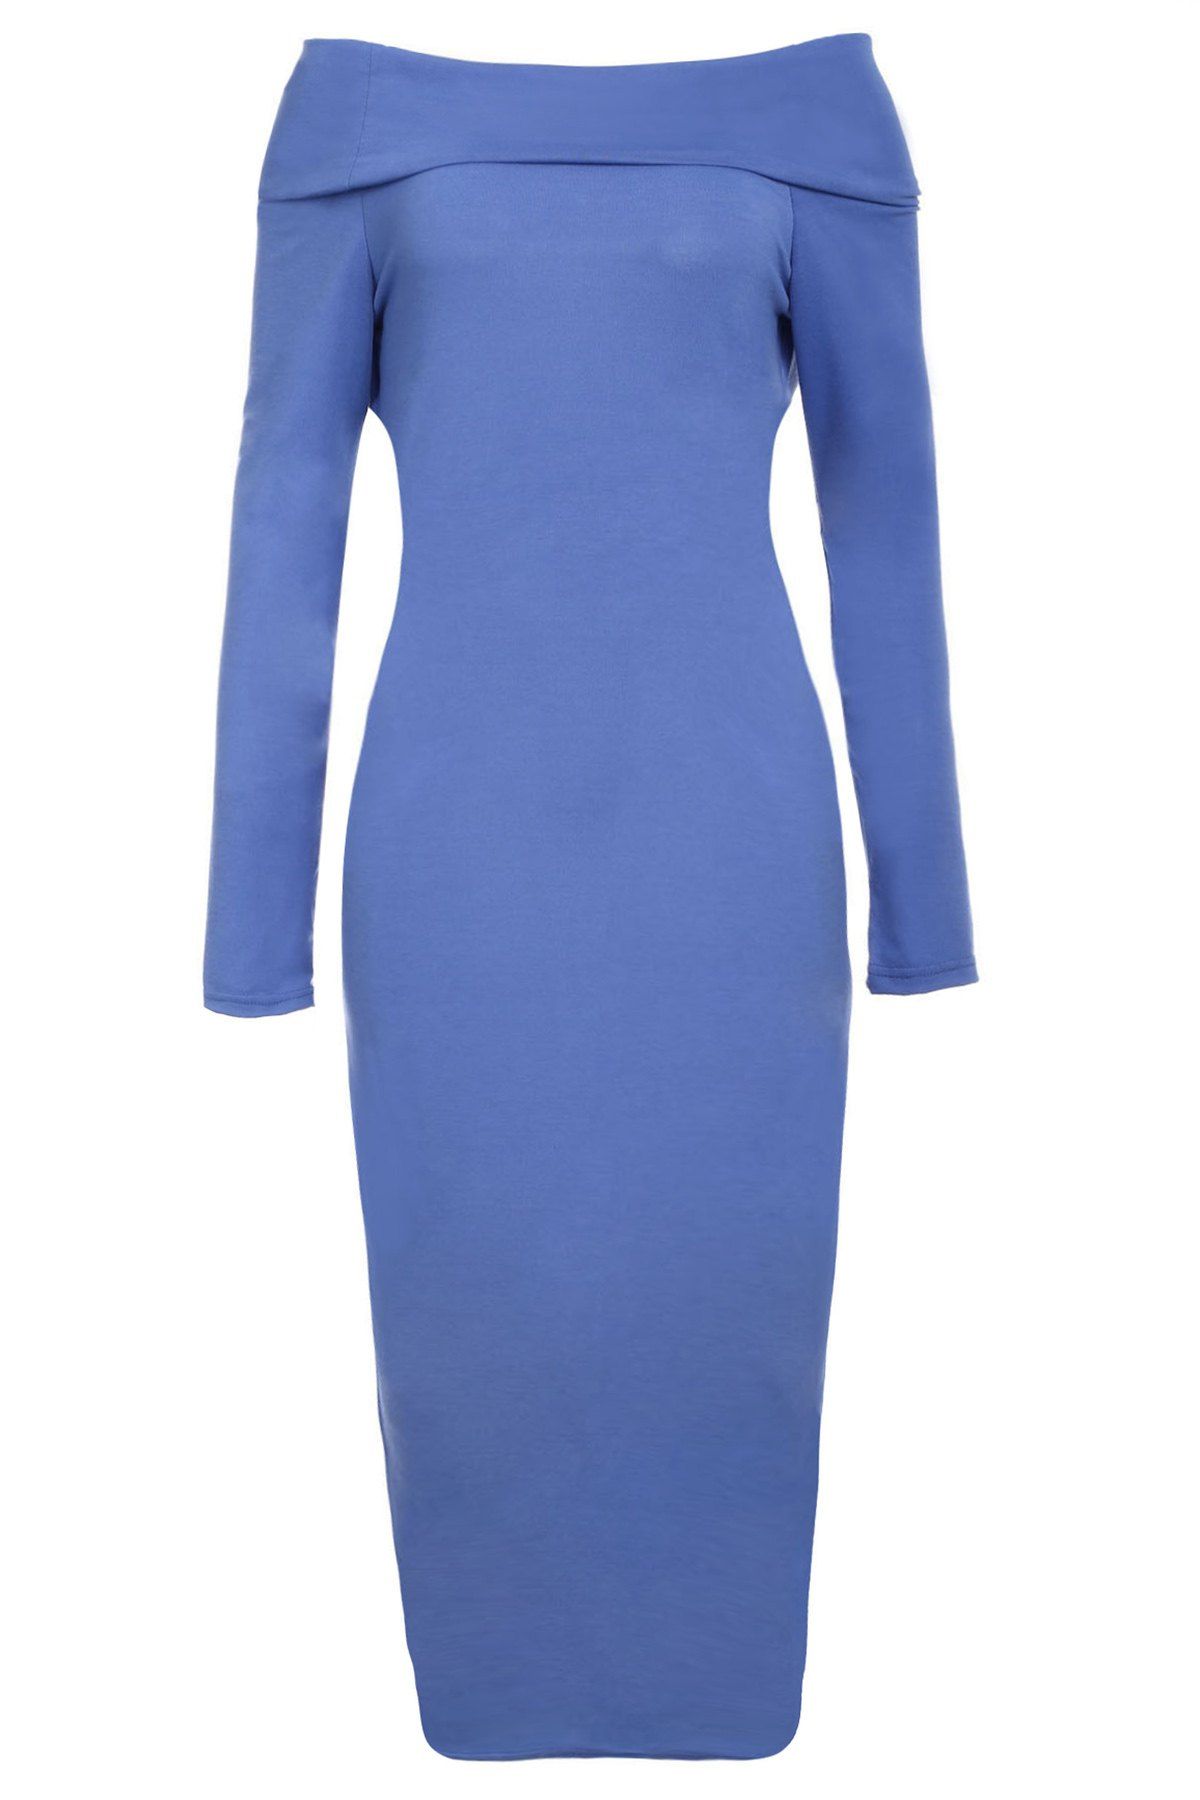 Sexy Off-The-Shoulder Long Sleeve Bodycon Solid Color Women's Dress - BLUE S